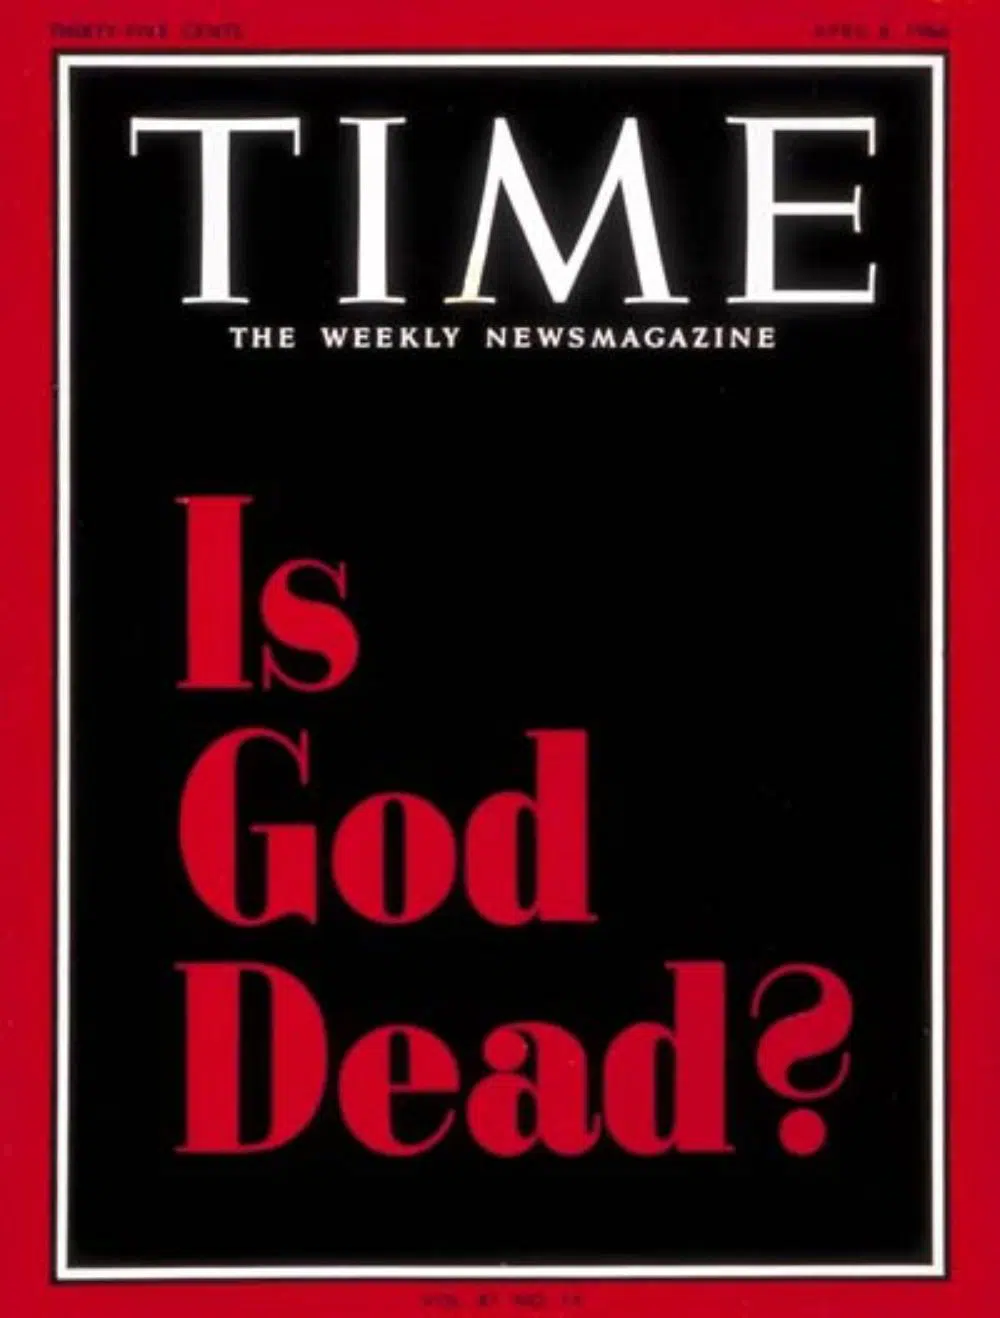 The Time Magazine